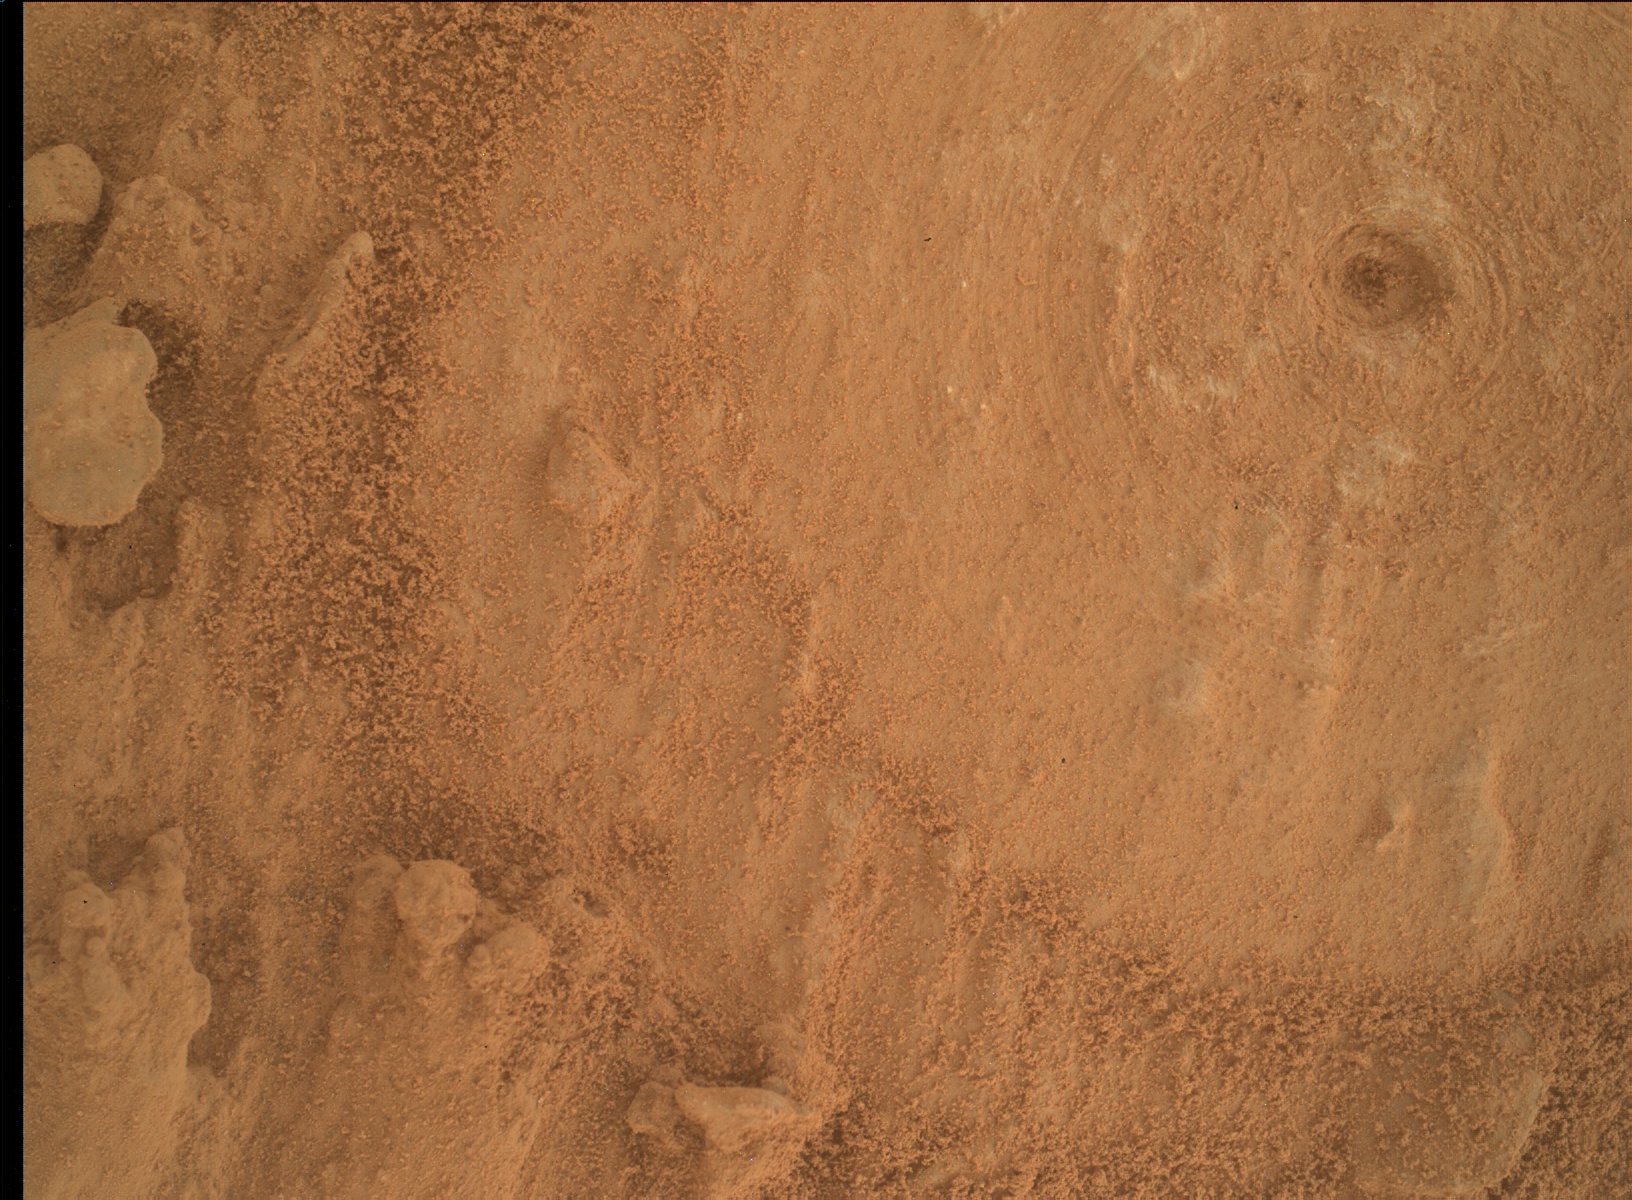 Nasa's Mars rover Curiosity acquired this image using its Mars Hand Lens Imager (MAHLI) on Sol 3511